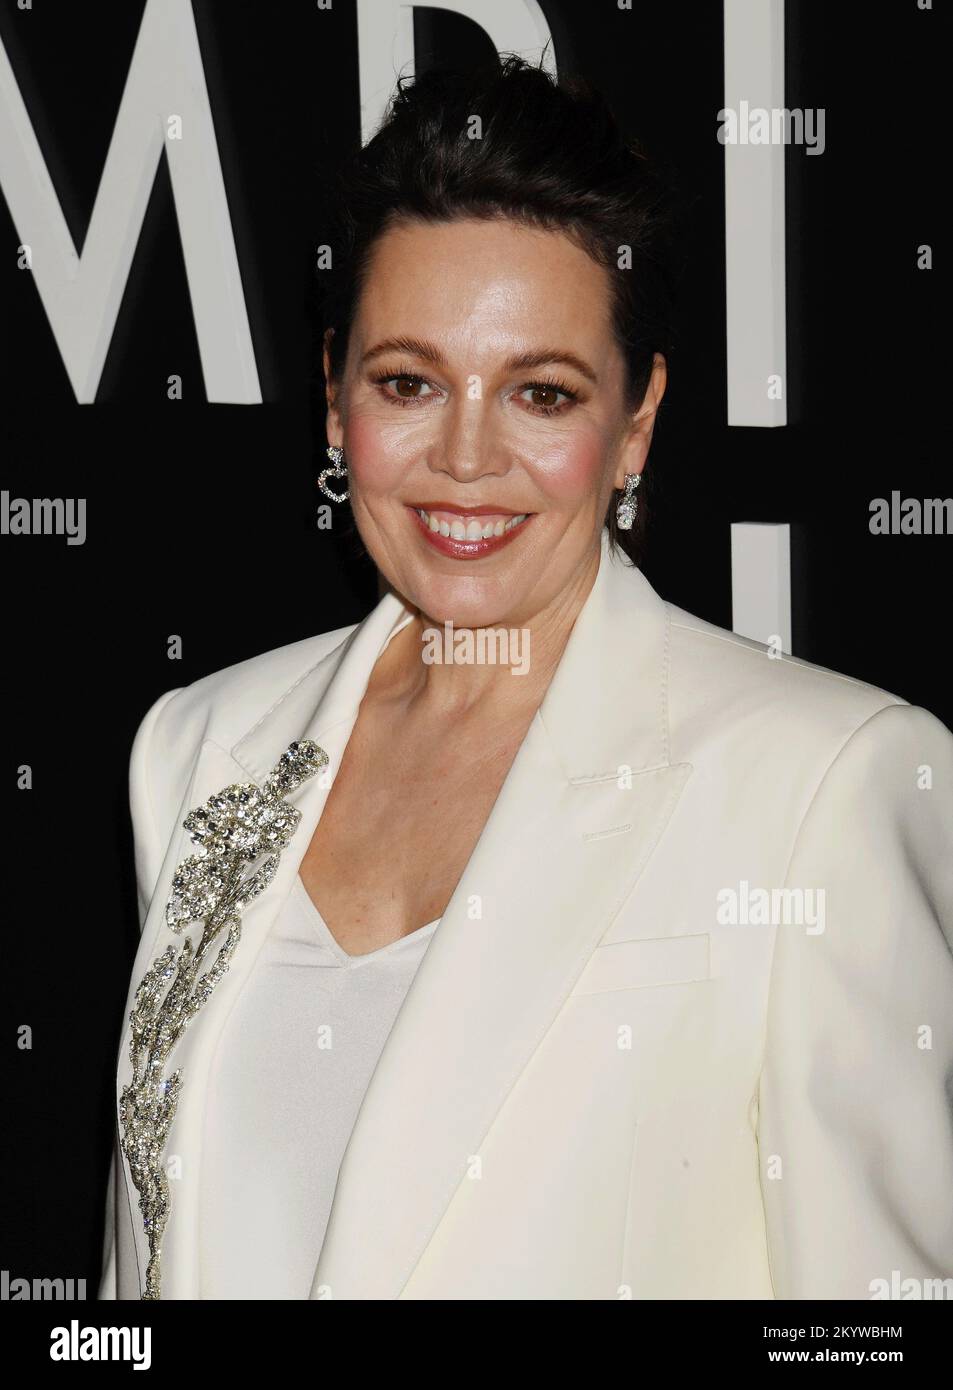 BEVERLY HILLS, CALIFORNIA - DECEMBER 01: Olivia Colman attends Los Angeles premiere of Fox Searchlight Pictures 'Empire of Light' at Samuel Goldwyn Th Stock Photo